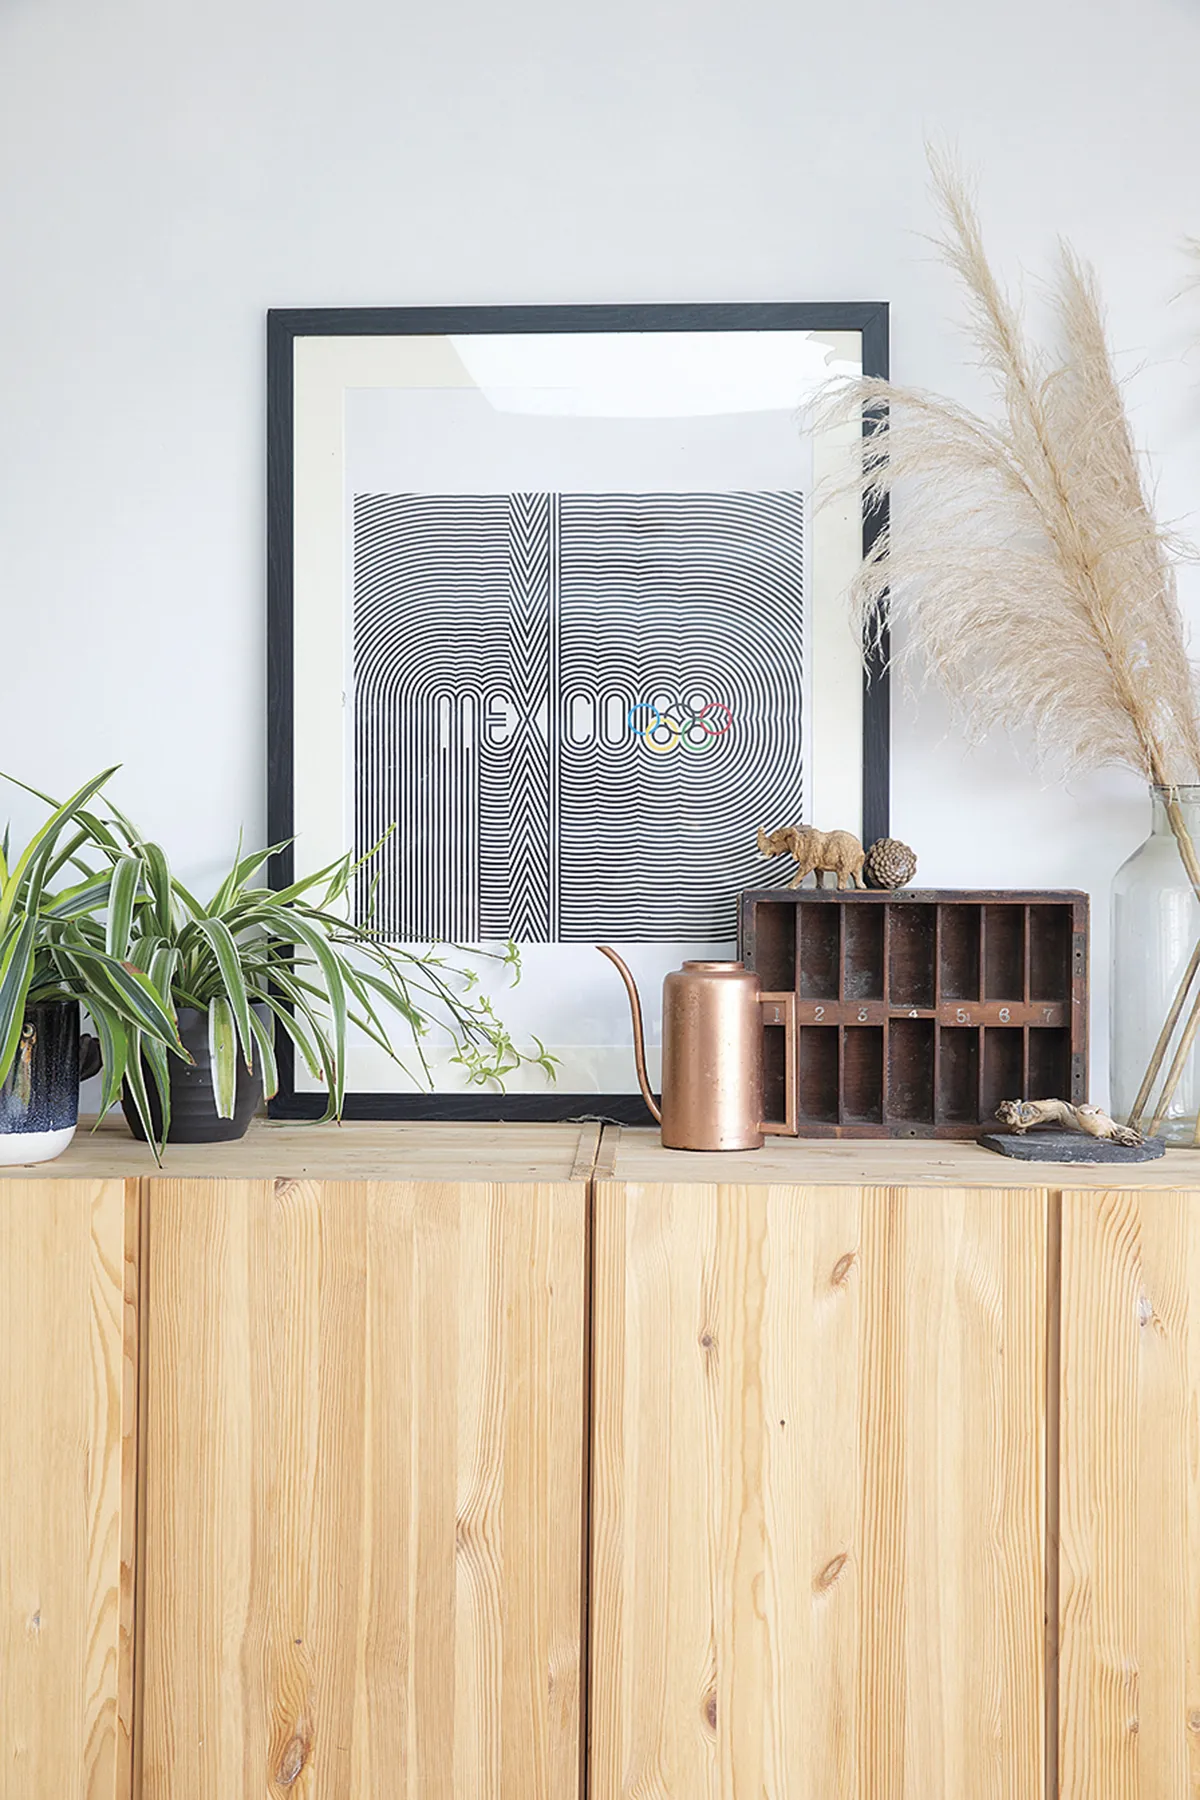 ‘We fixed these IKEA Ivar cabinets together to made them look like one sideboard,’ says Sam. ‘Hanging them on the wall makes them easier to clean and they hide all the kids’ toys’